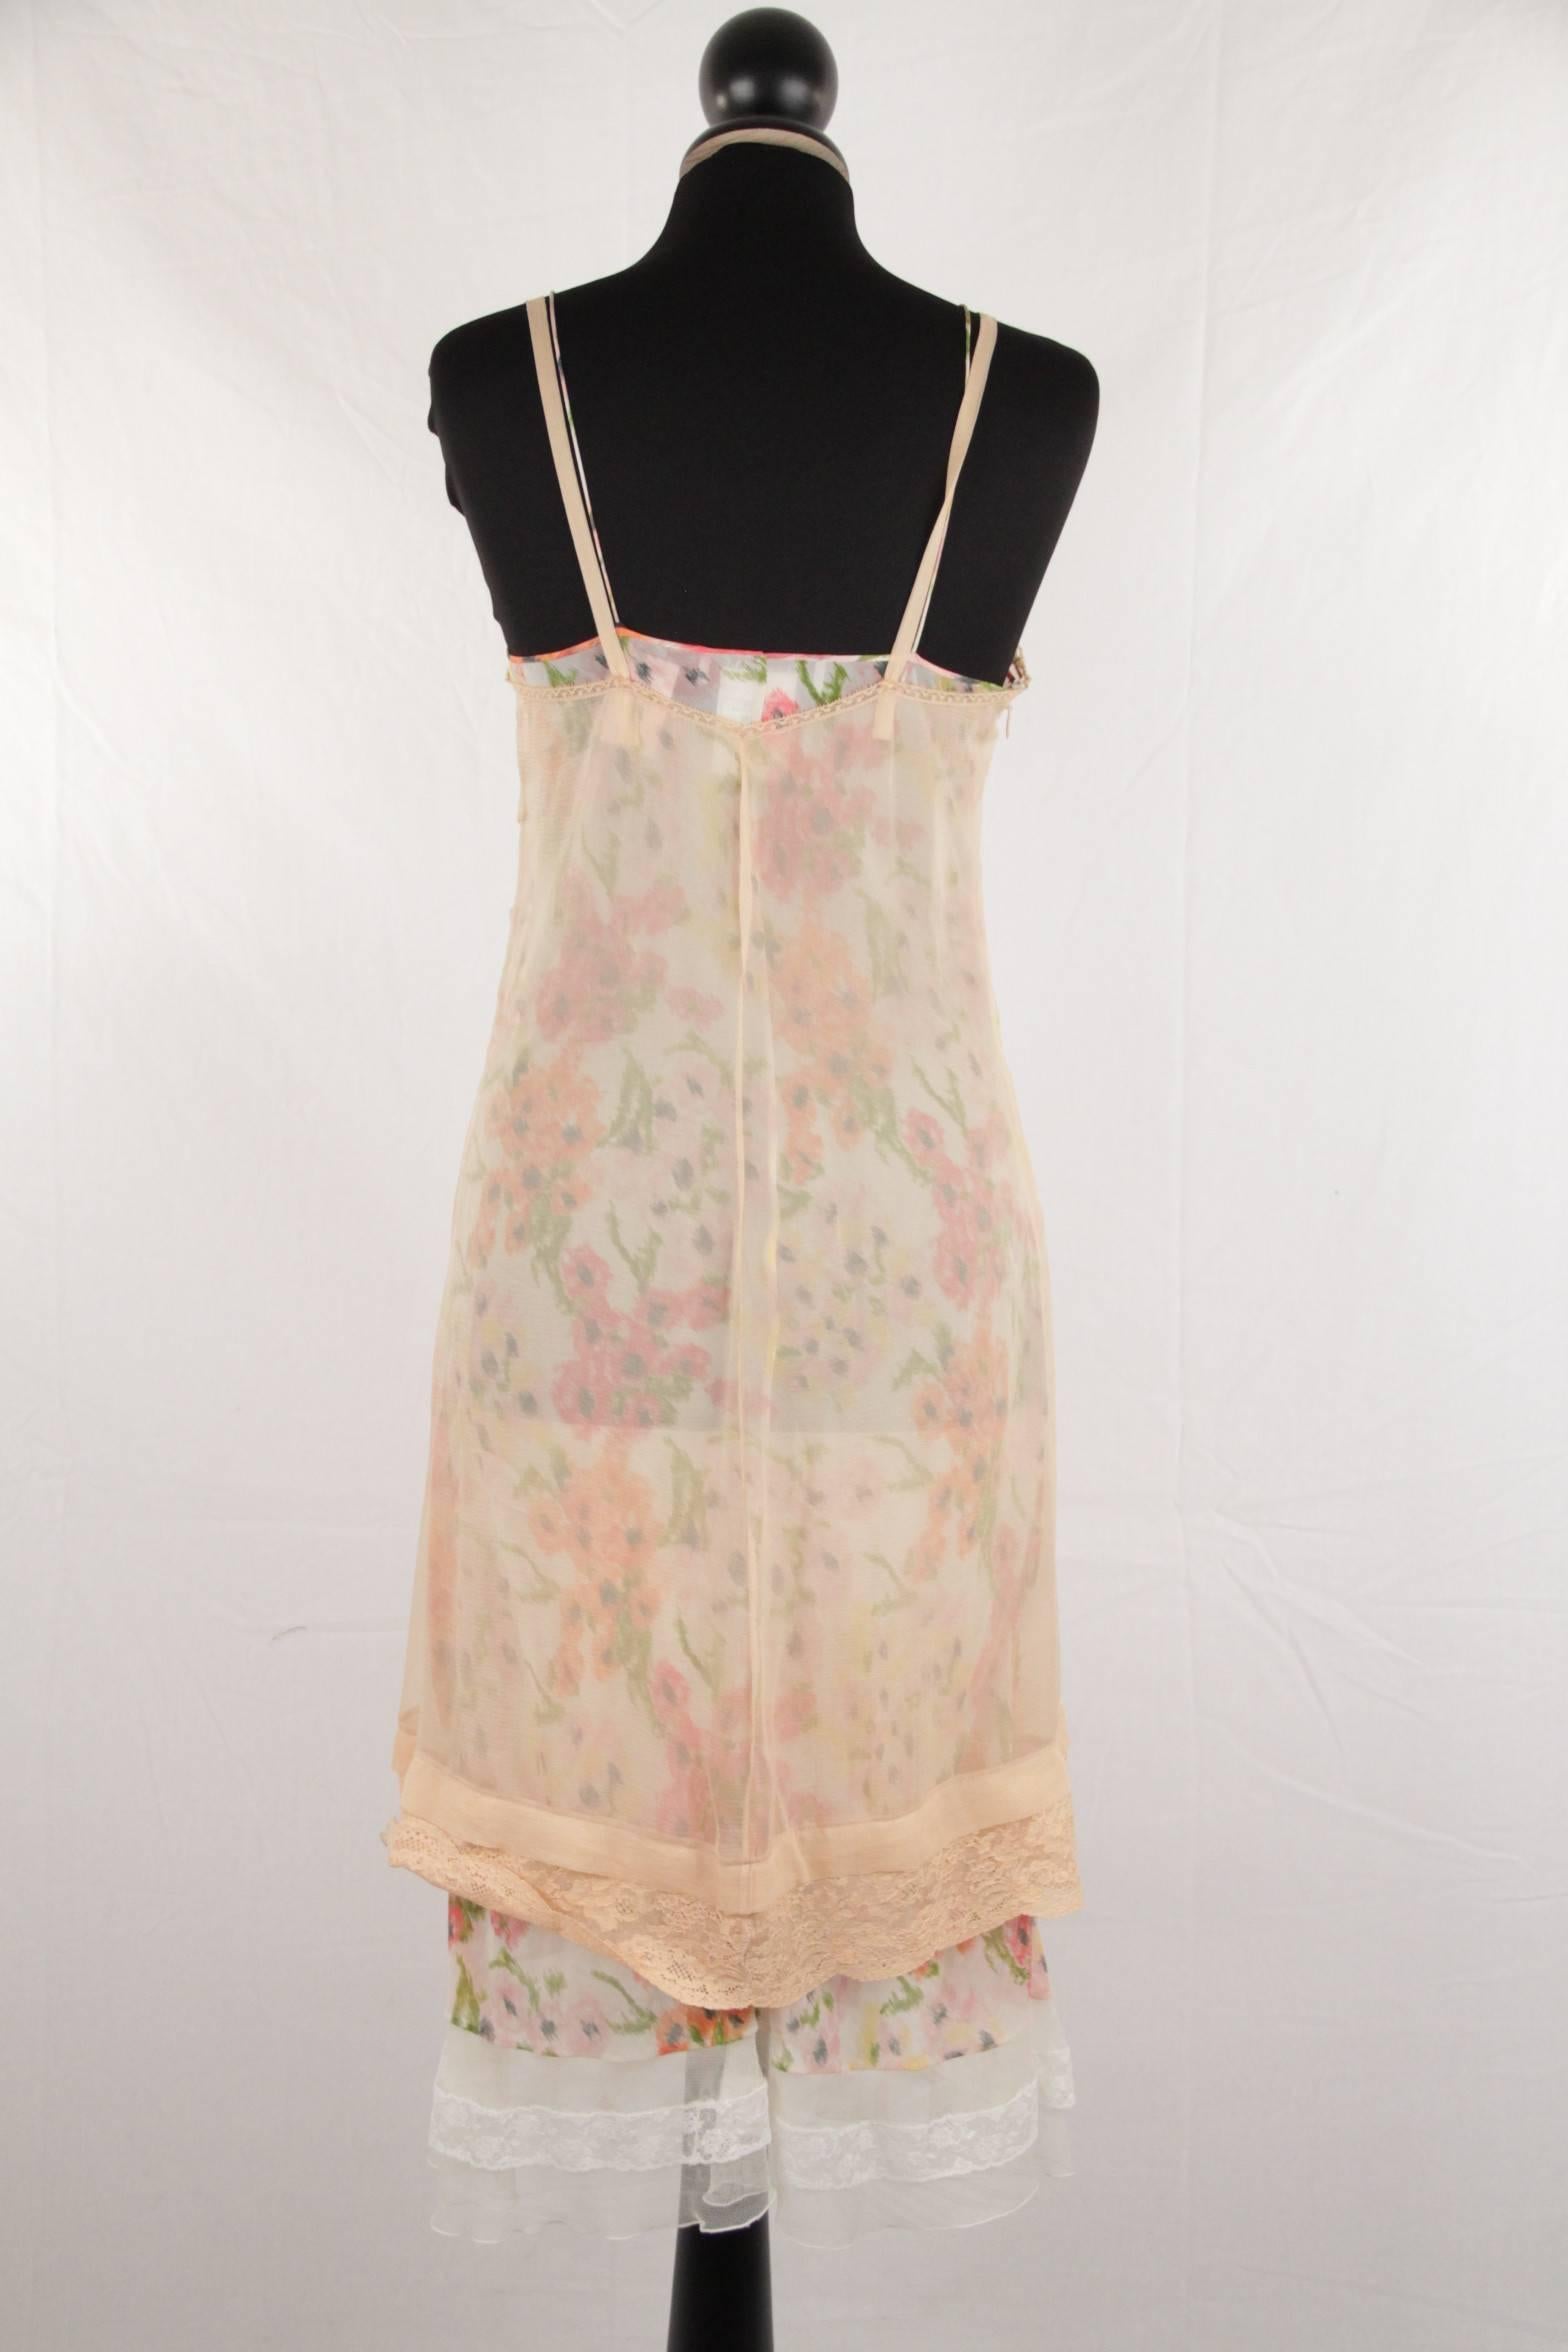 Women's CHRISTIAN DIOR Silky Floral Layered CAMI DRESS w/ Lace Trim SIZE 6